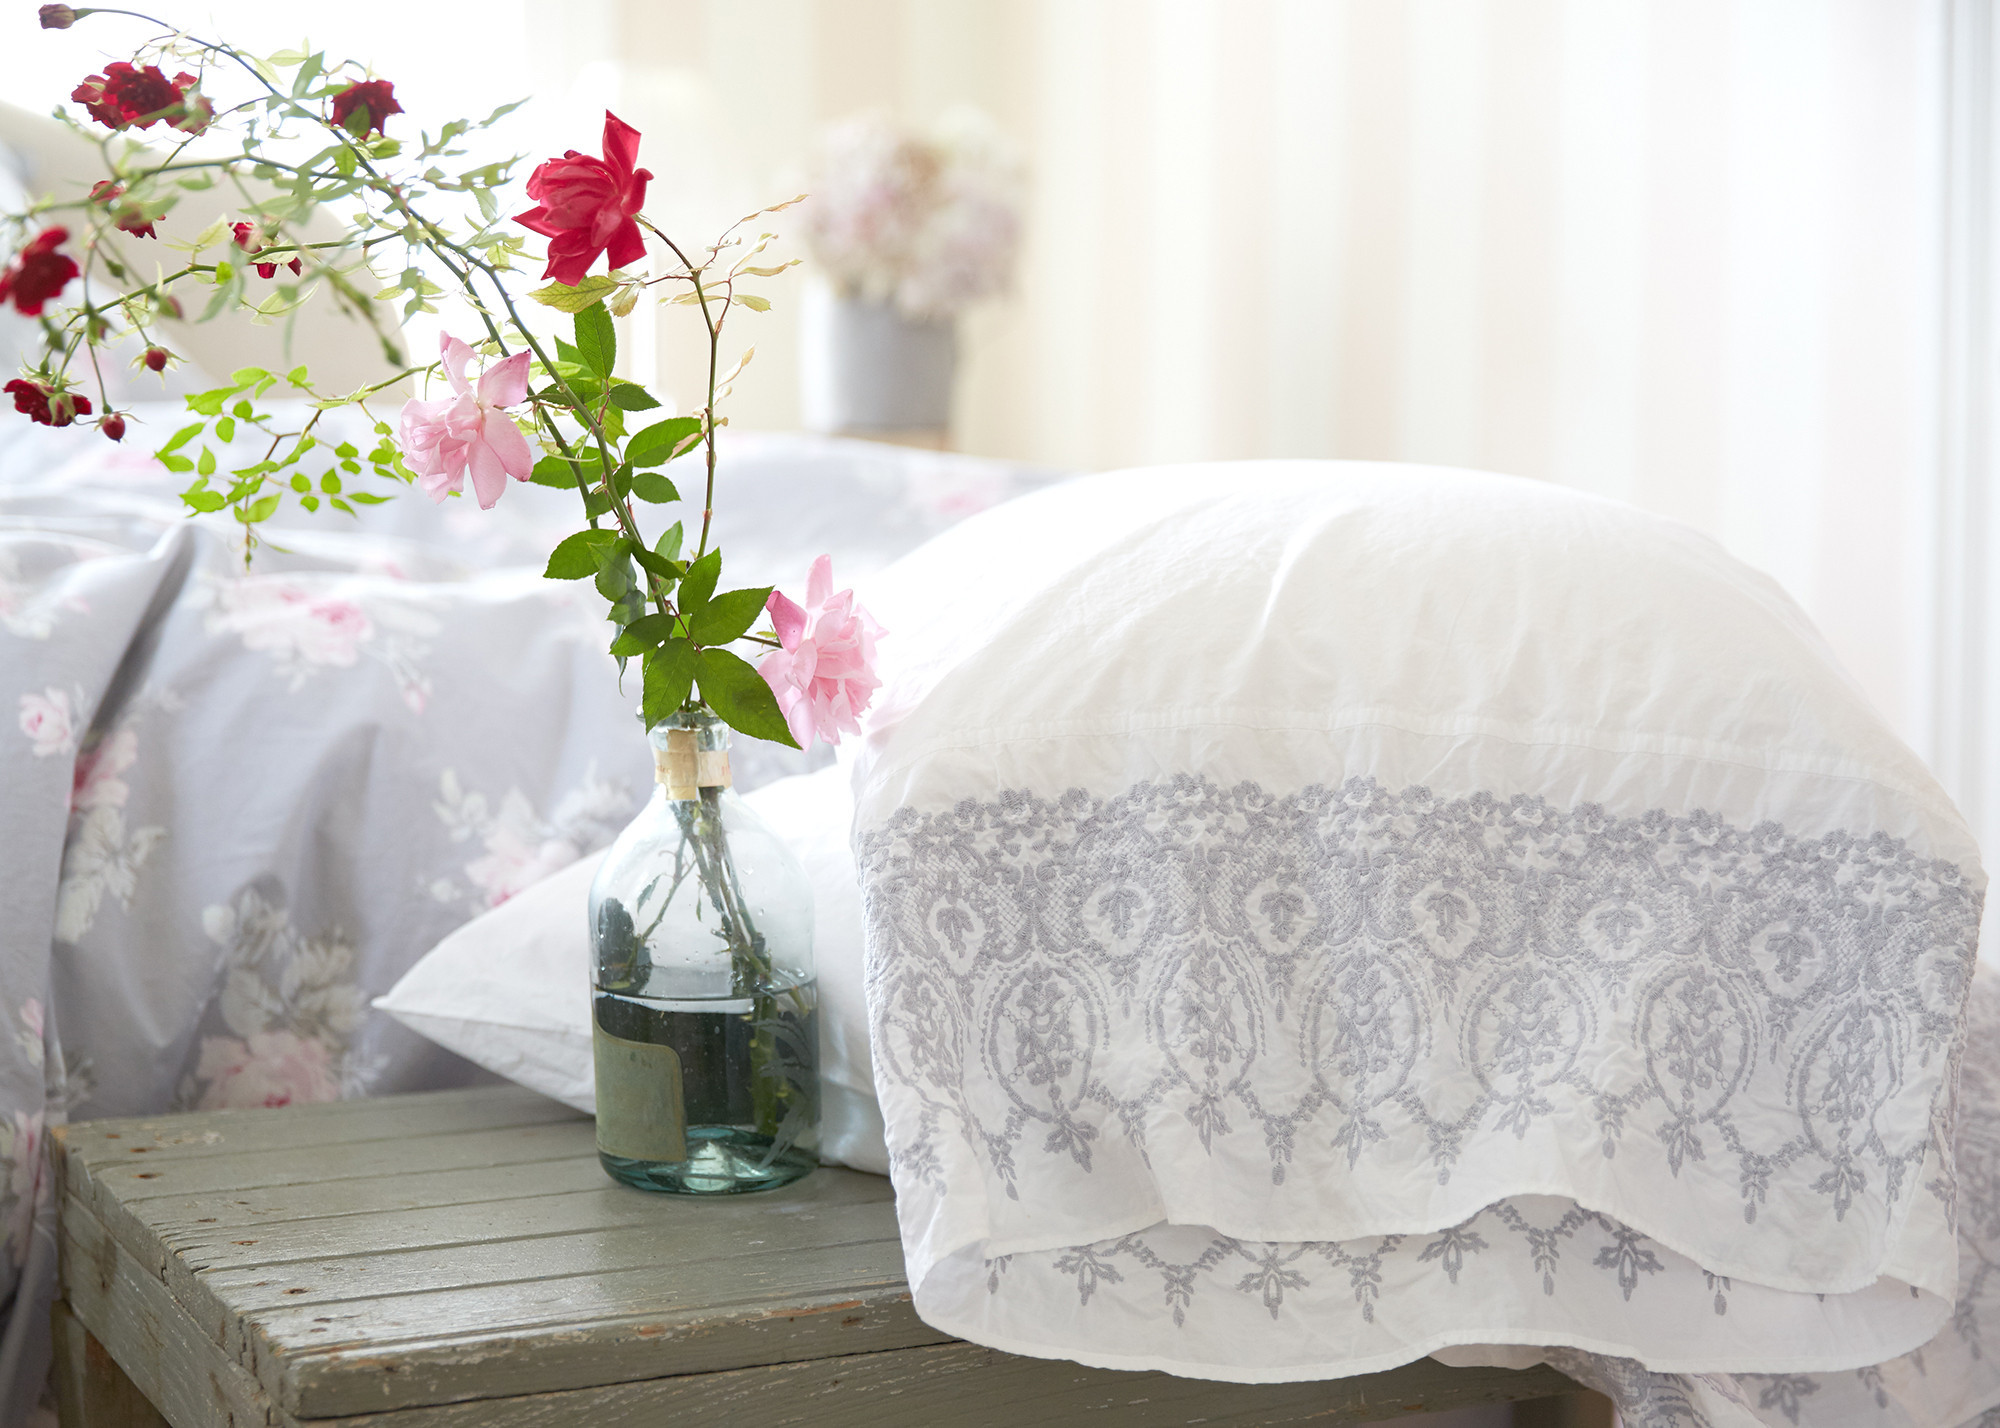 Shabby Chic Decor finds await you in this inspiring lineup of interior design inspiration. #shabbychic #interiordesignideas #decoratingideas #rachelashwell #bedroom